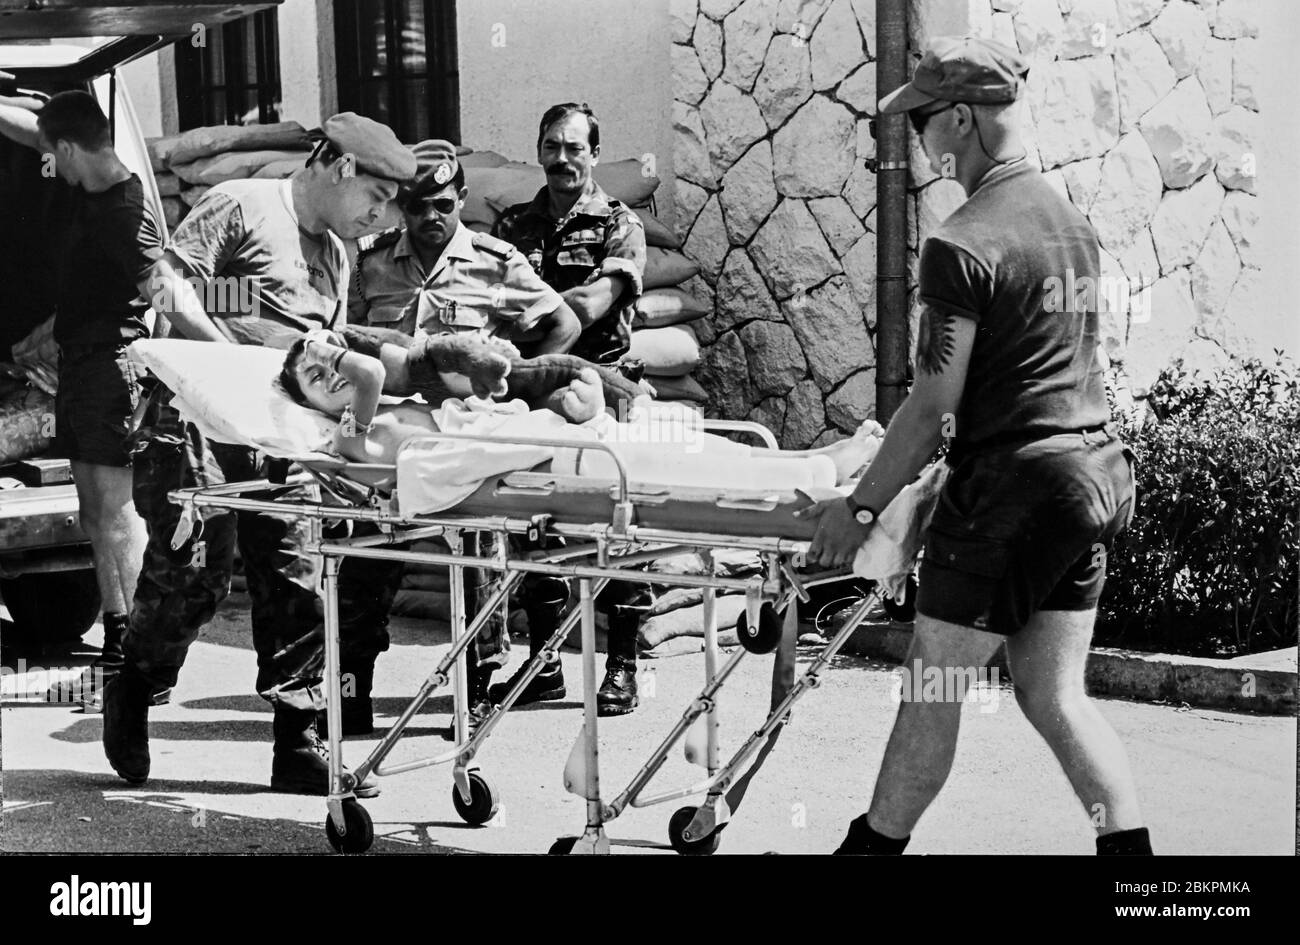 Bosnia 1993 near Mostar during the Balkan War - Young children rescued from Mostar are taken to hospital by UN forces Stock Photo